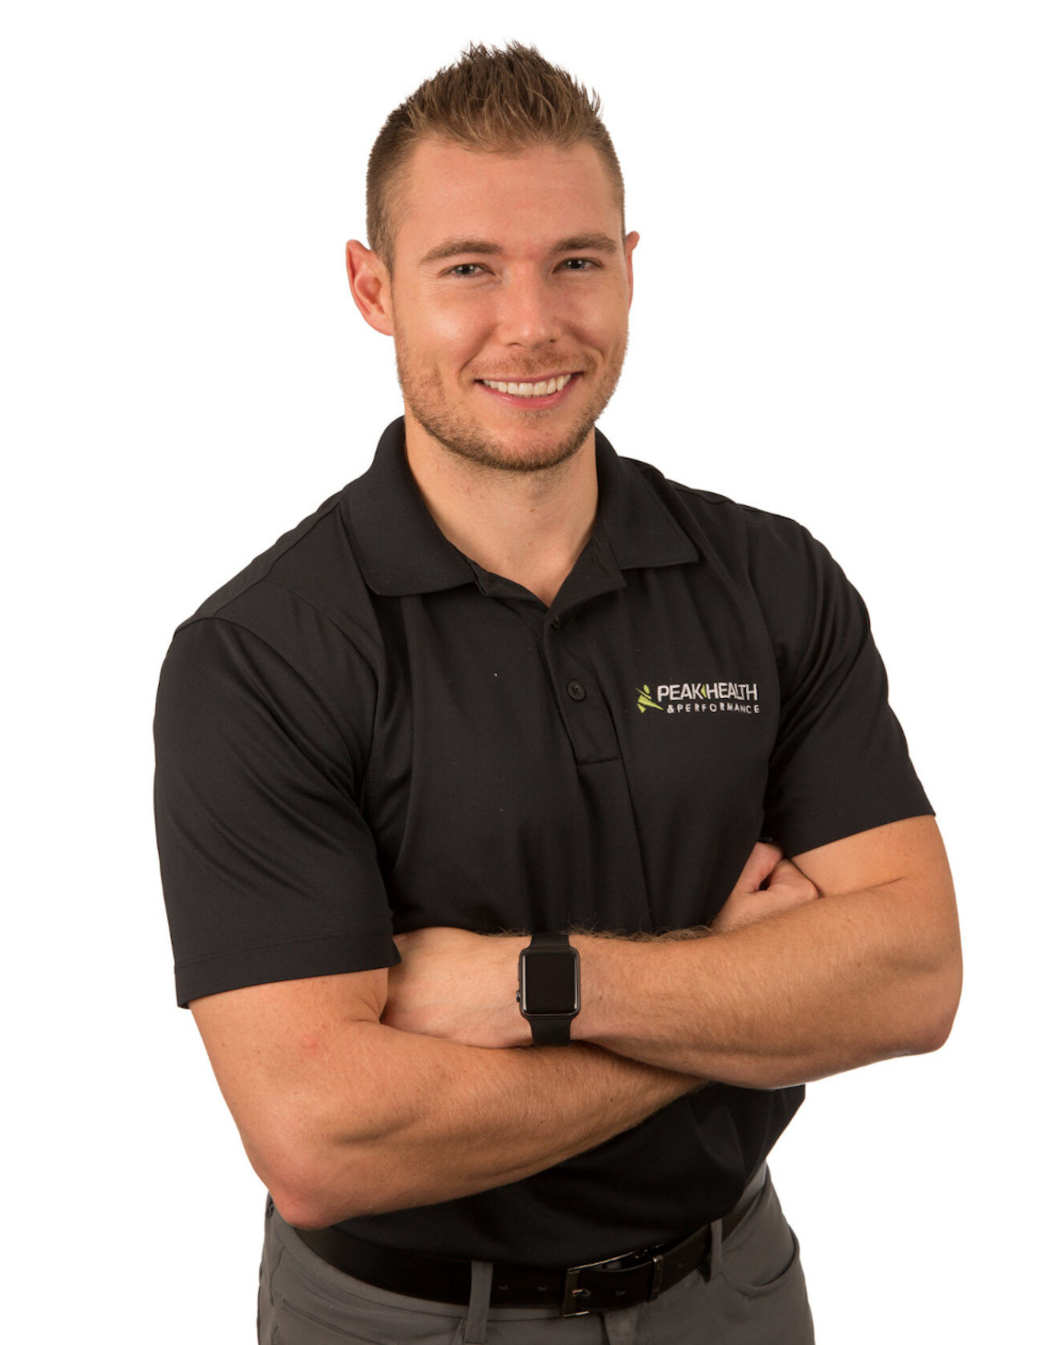 Dr. Kevin Creppin Chiropractor calgary 